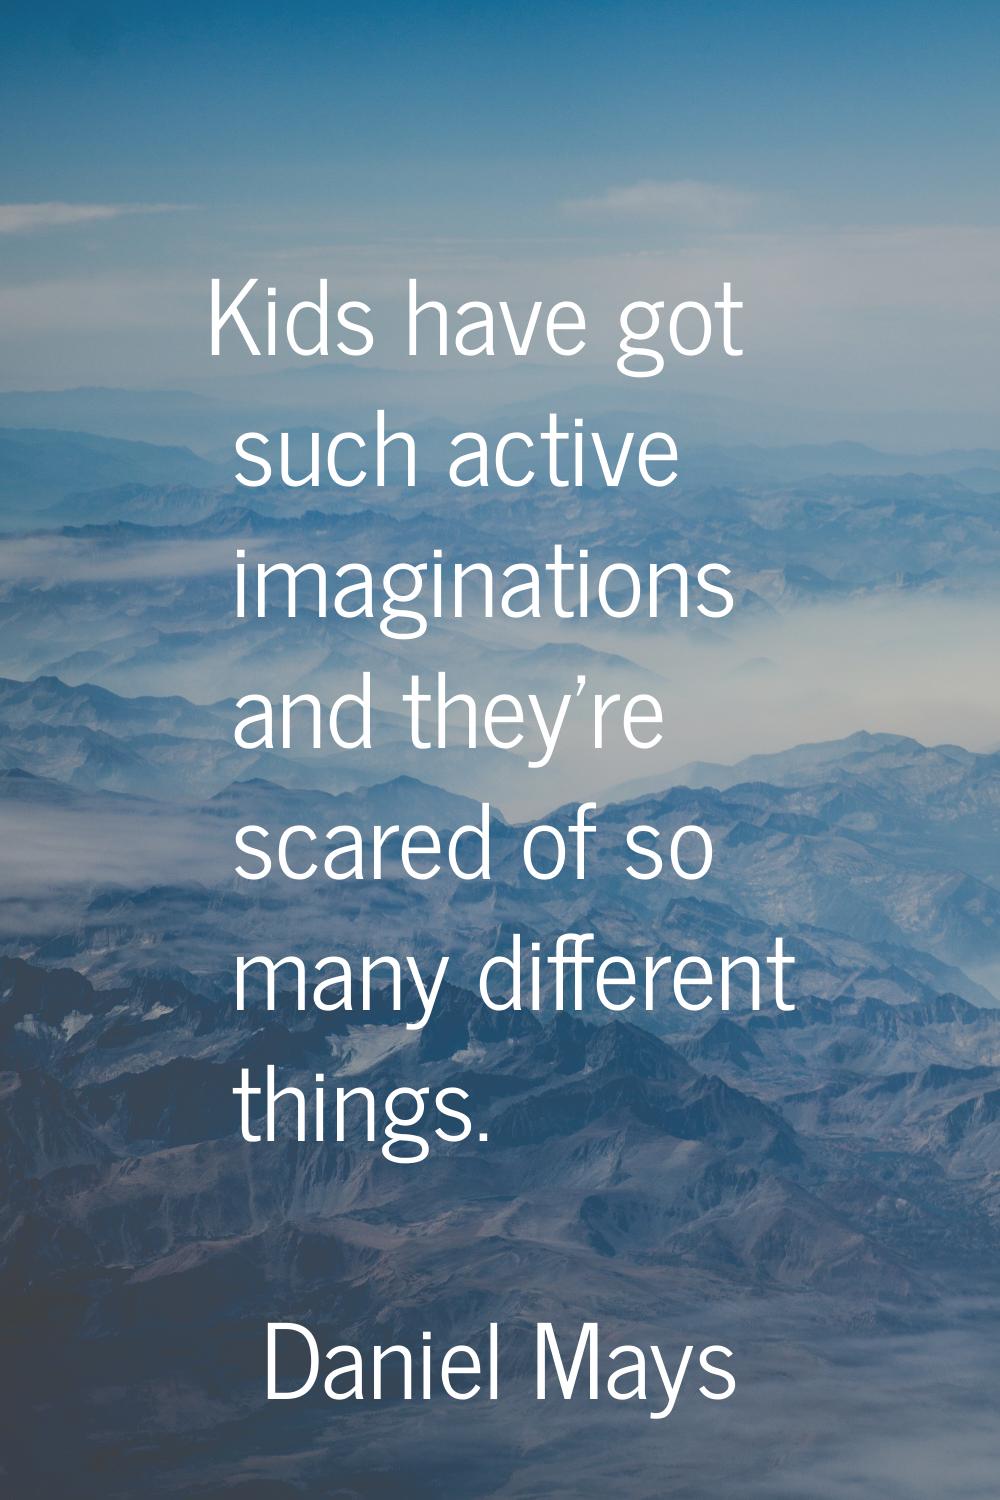 Kids have got such active imaginations and they're scared of so many different things.